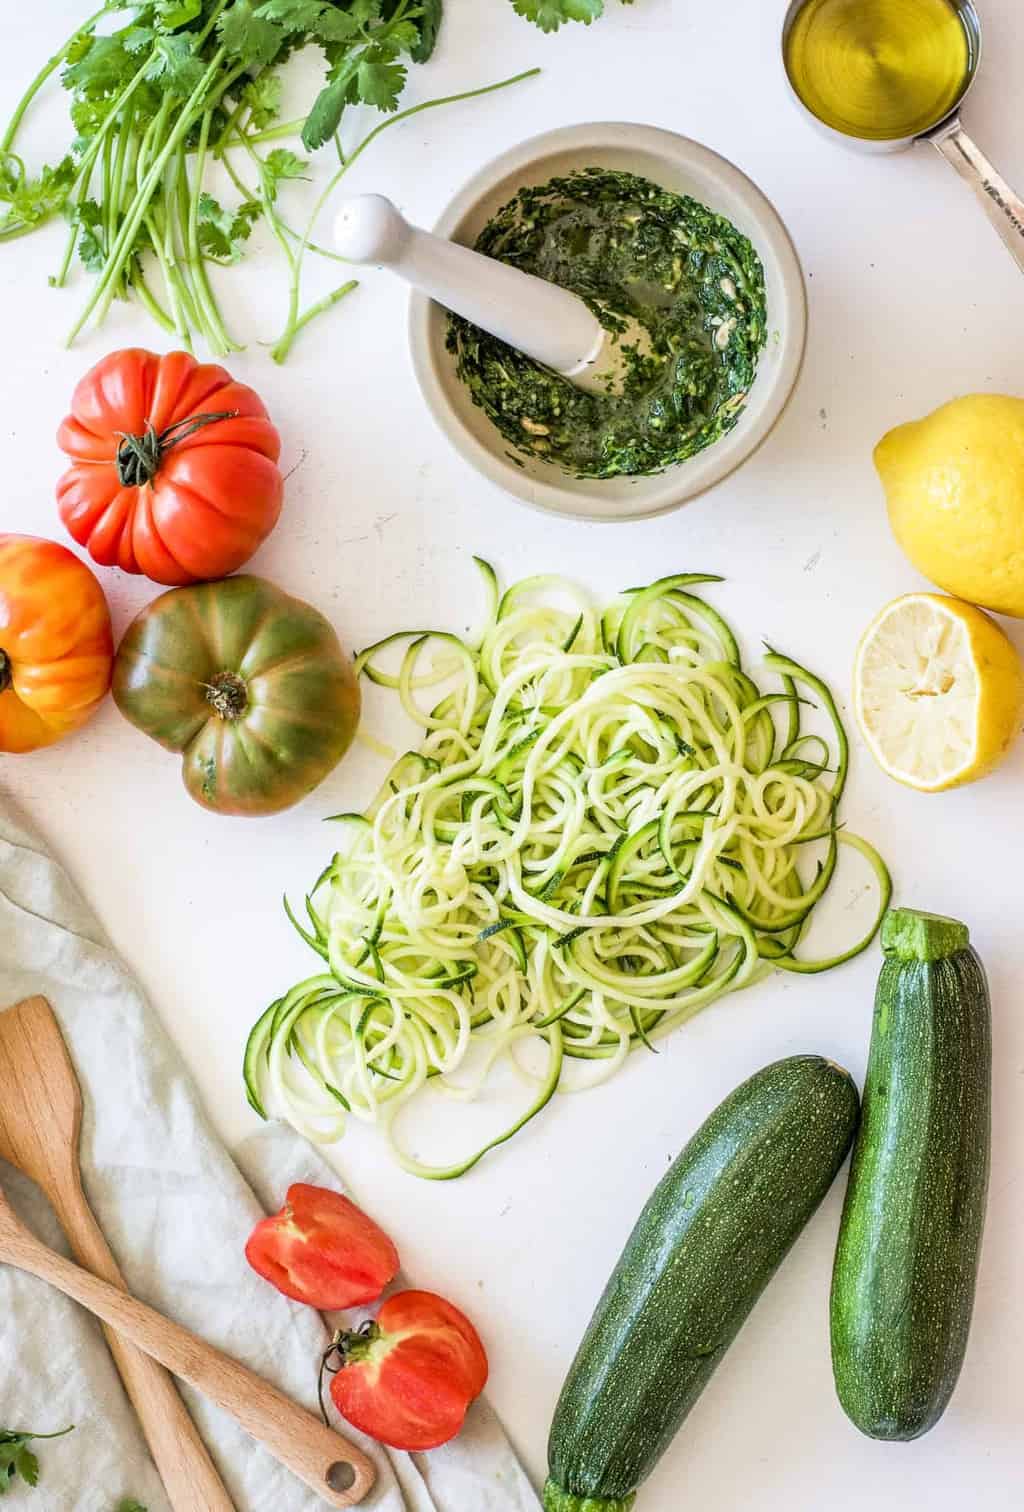 a detox dinner you won’t hate: zucchini noodles with cilantro pesto